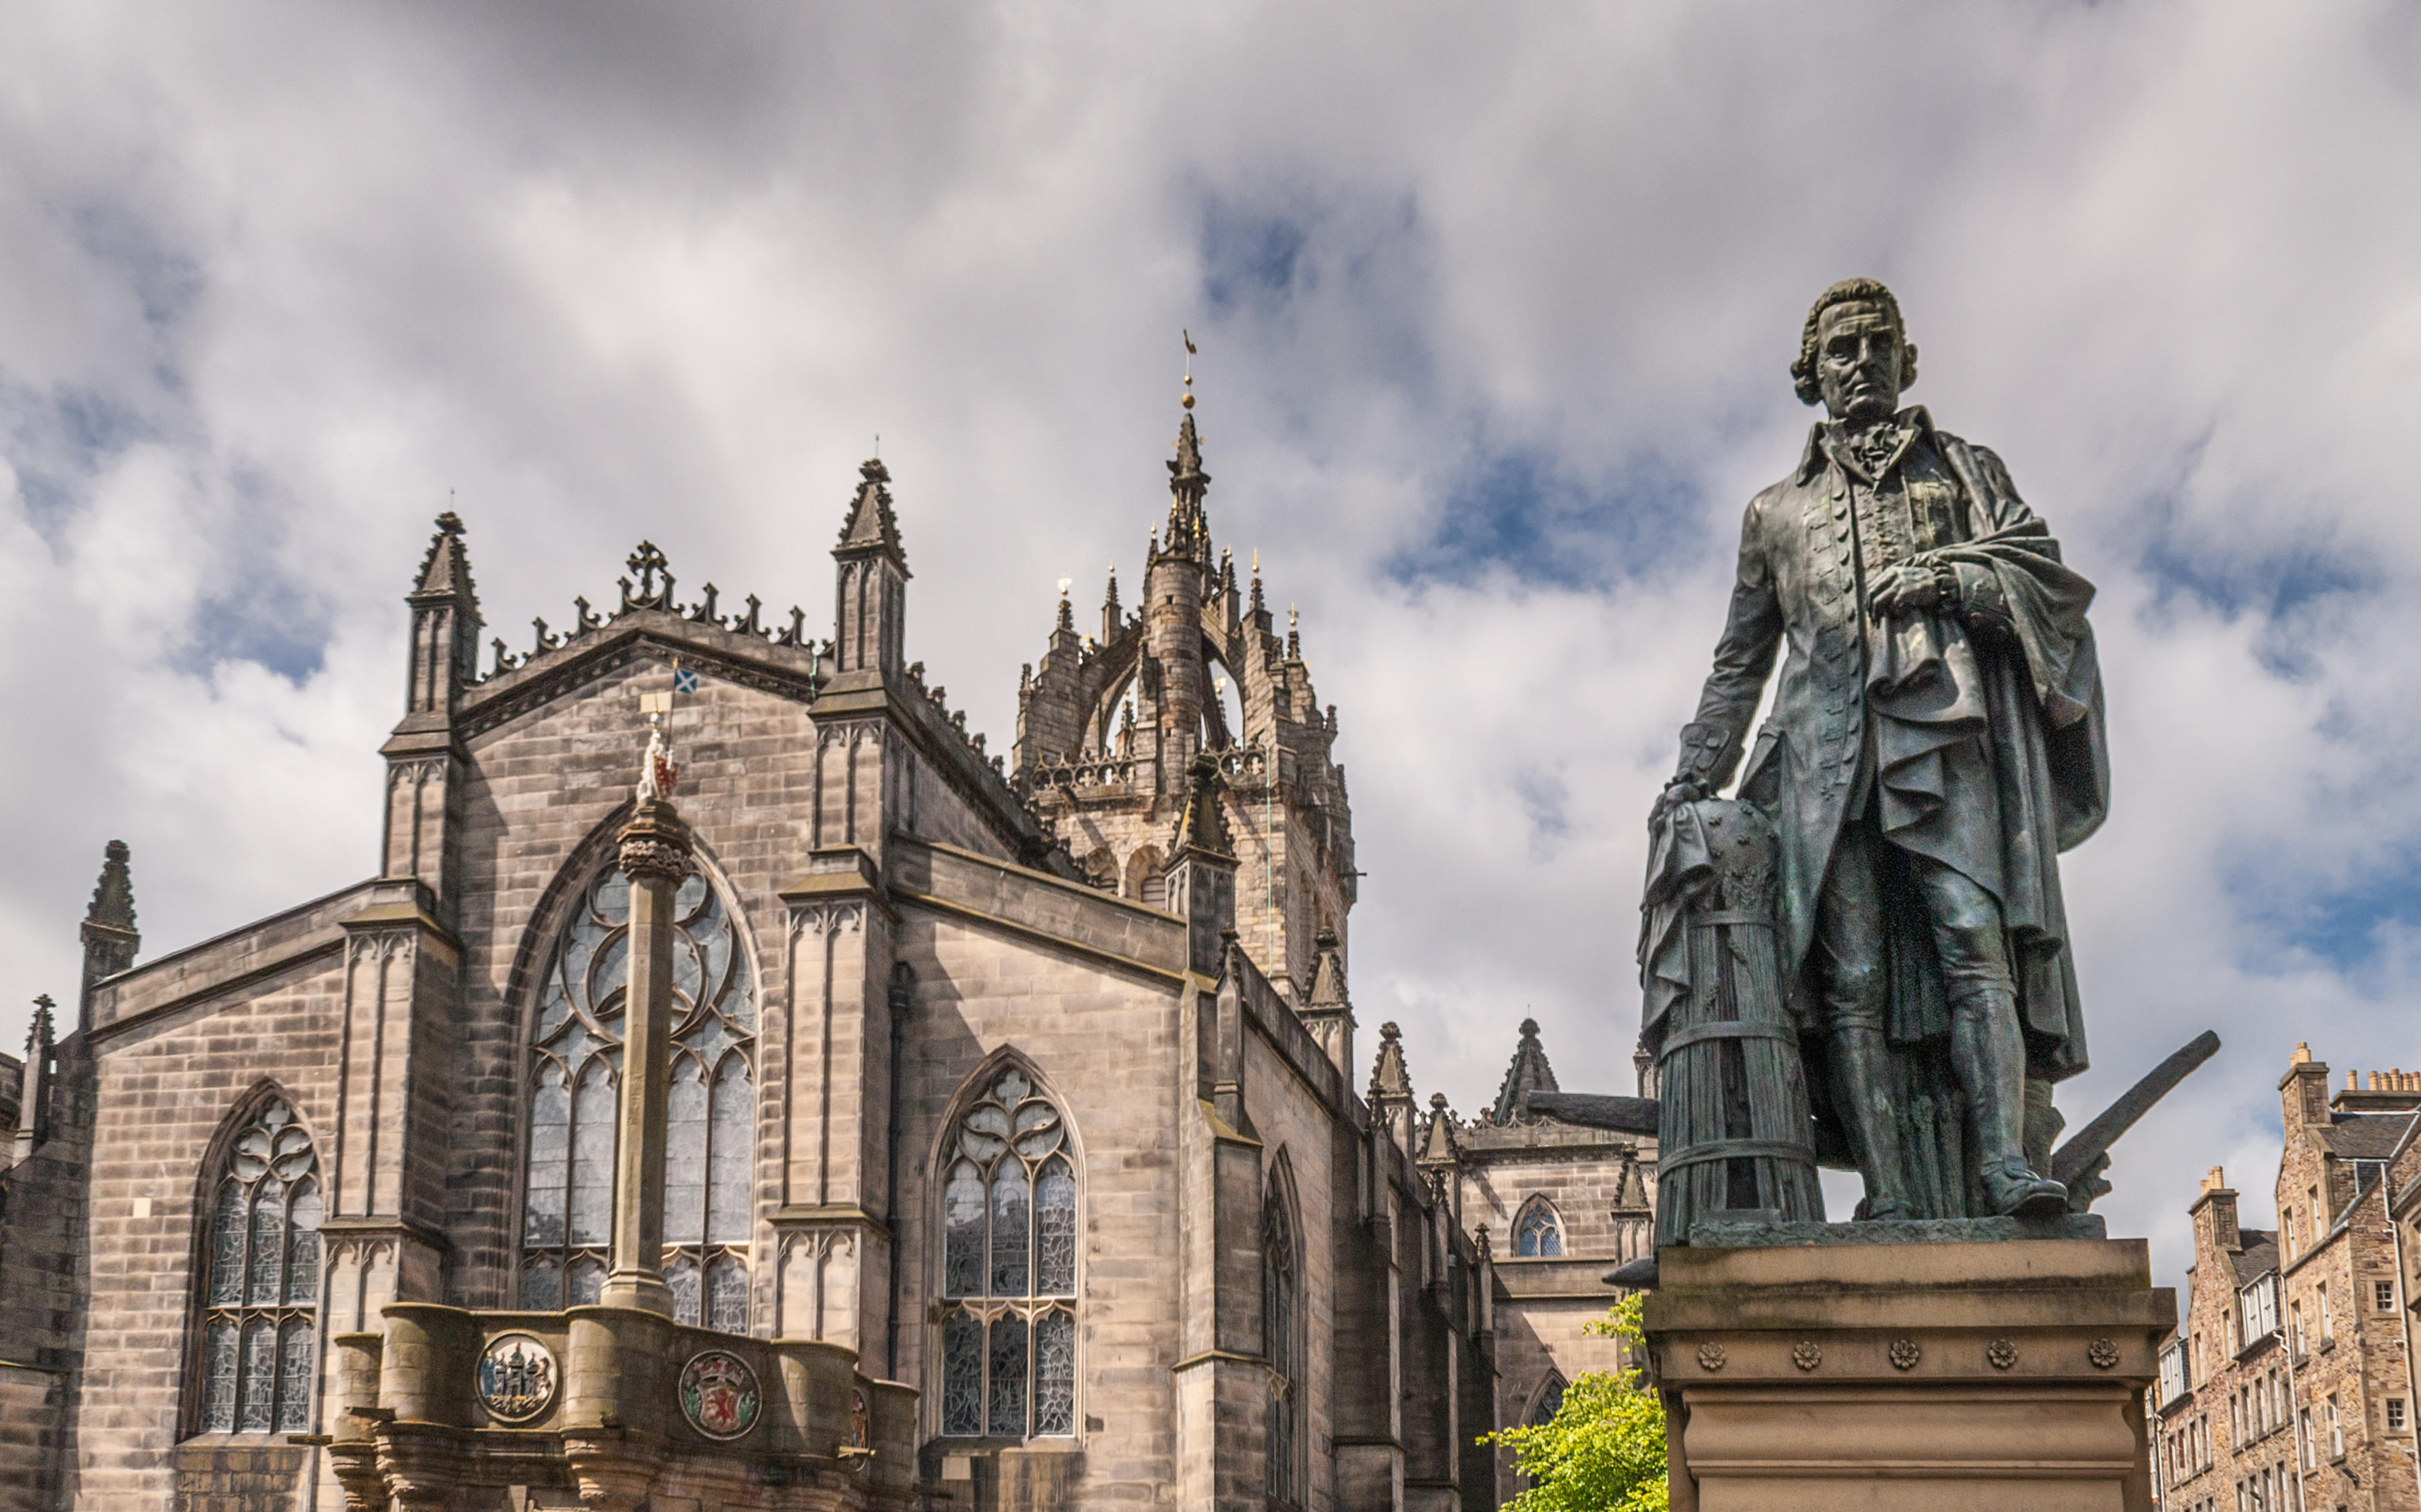 Visit Edinburgh and get chance to explore the city with a professional guide